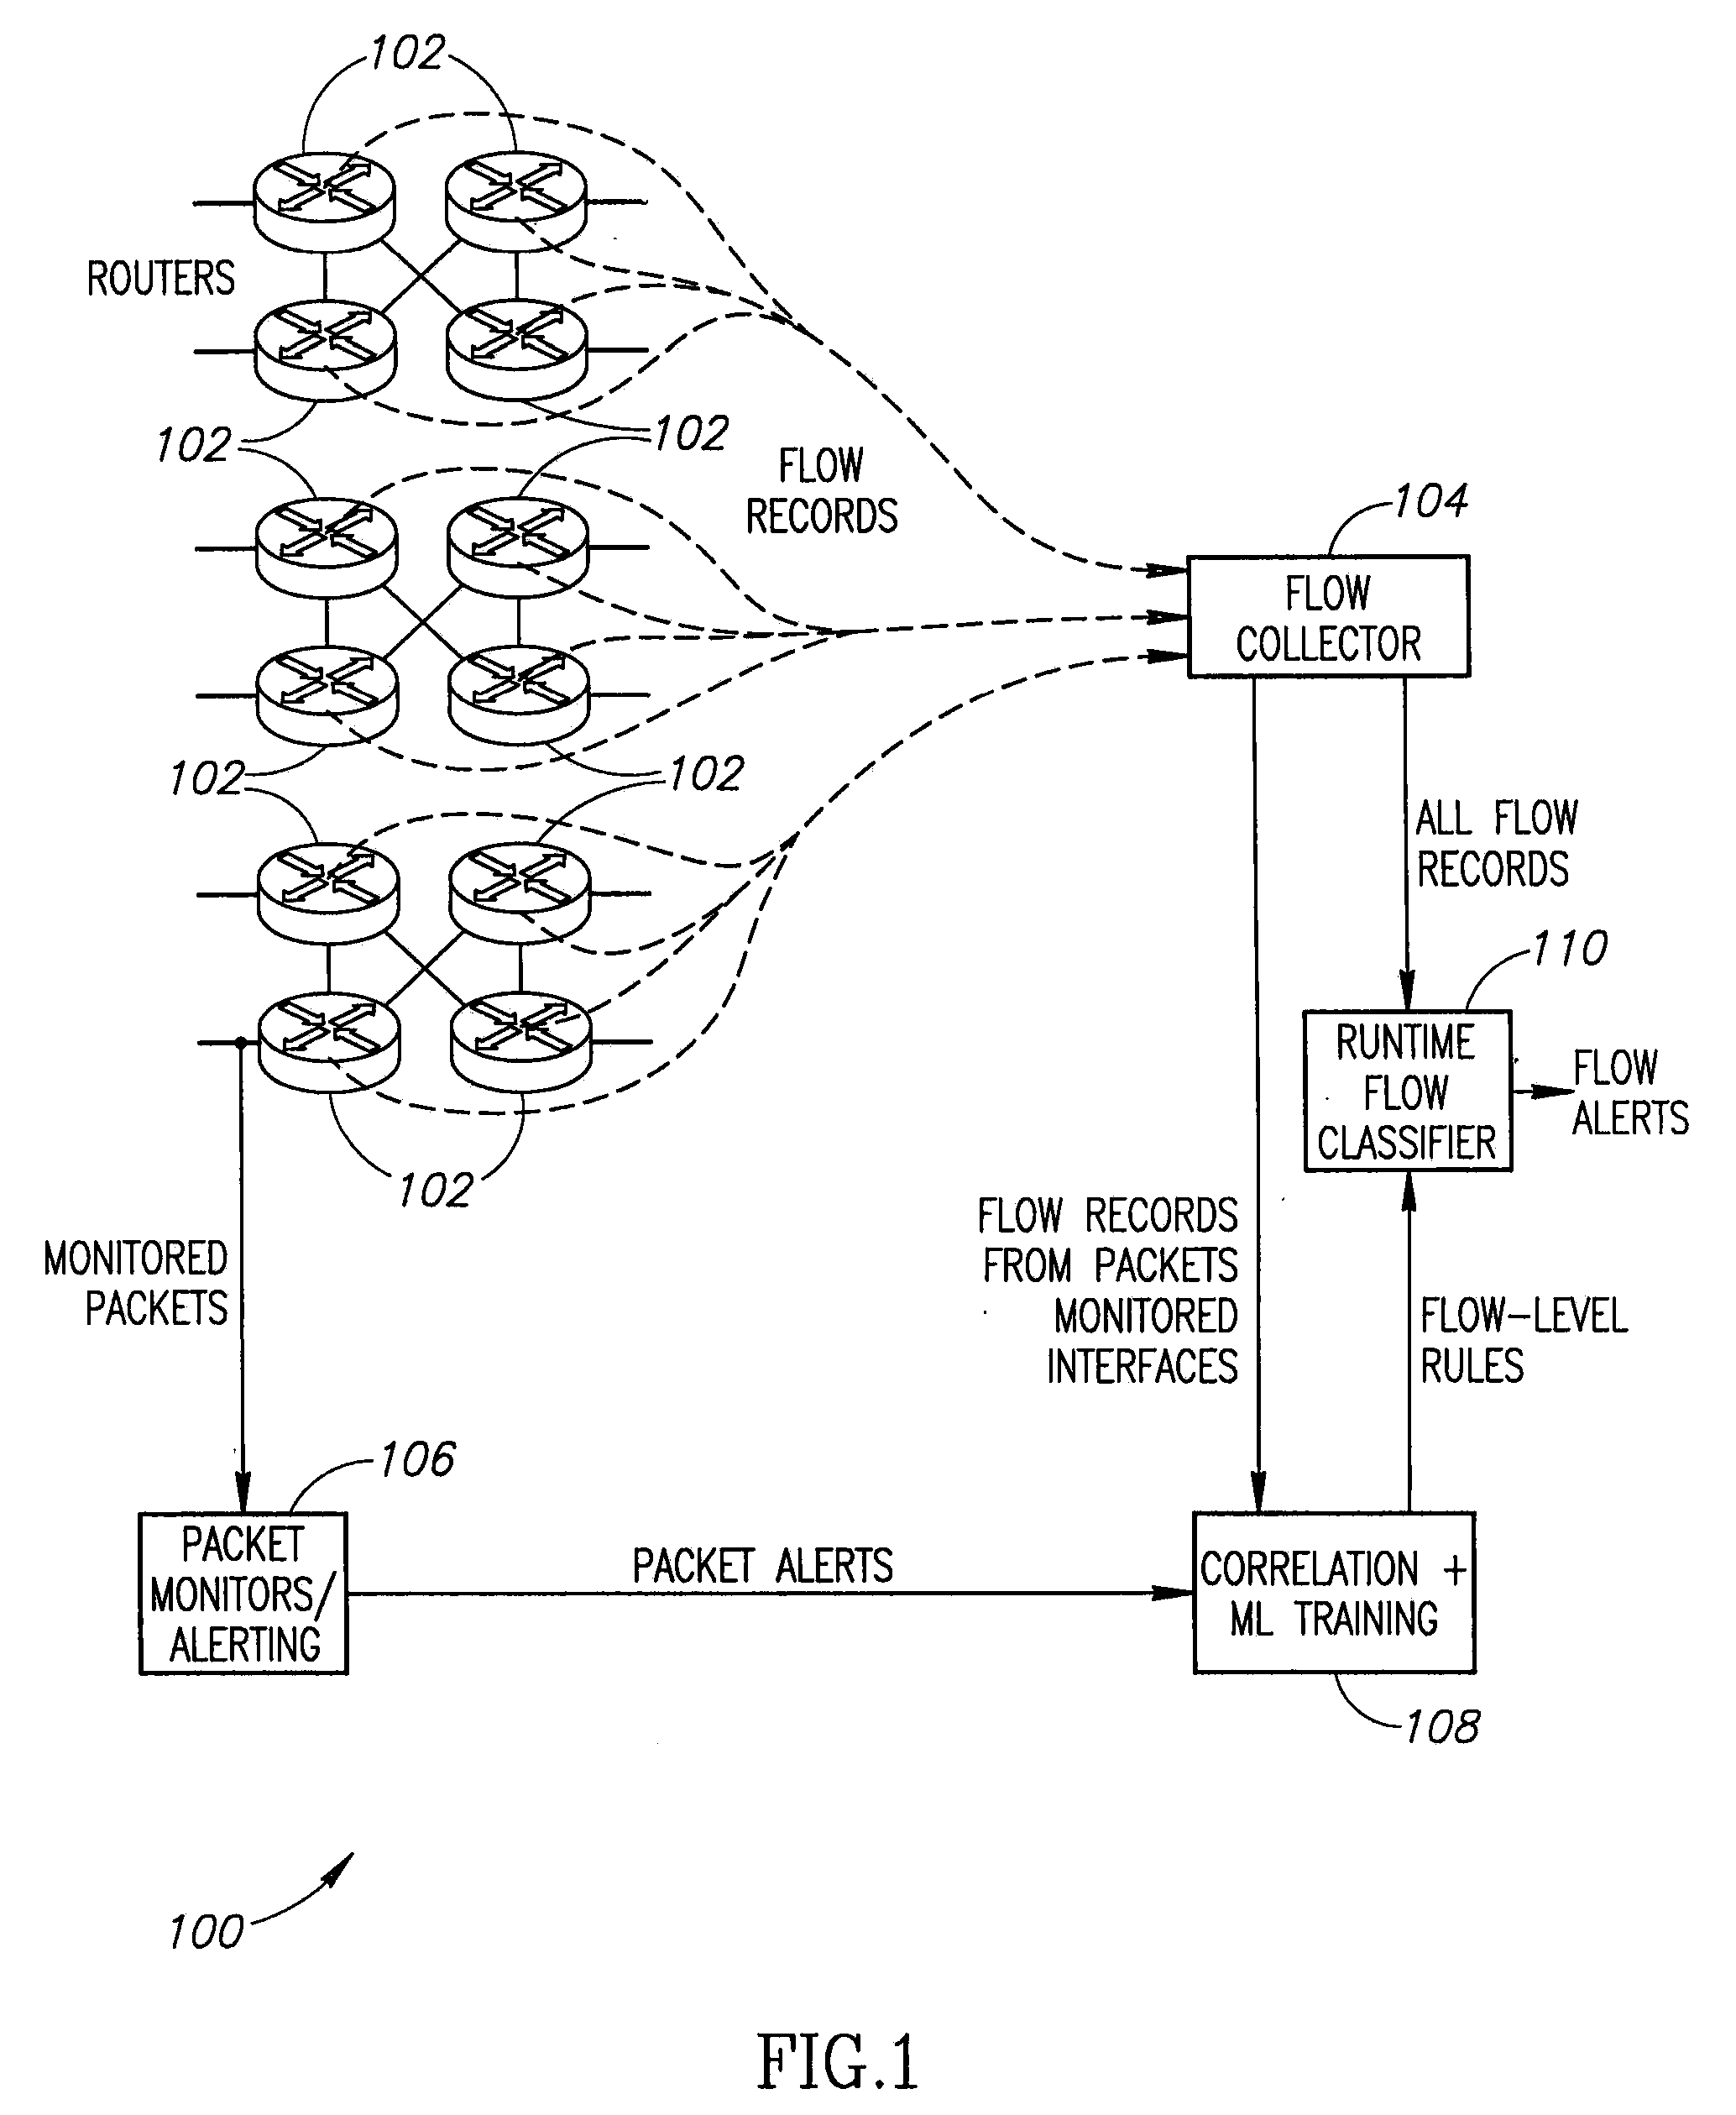 Systems and methods for rule-based anomaly detection on IP network flow